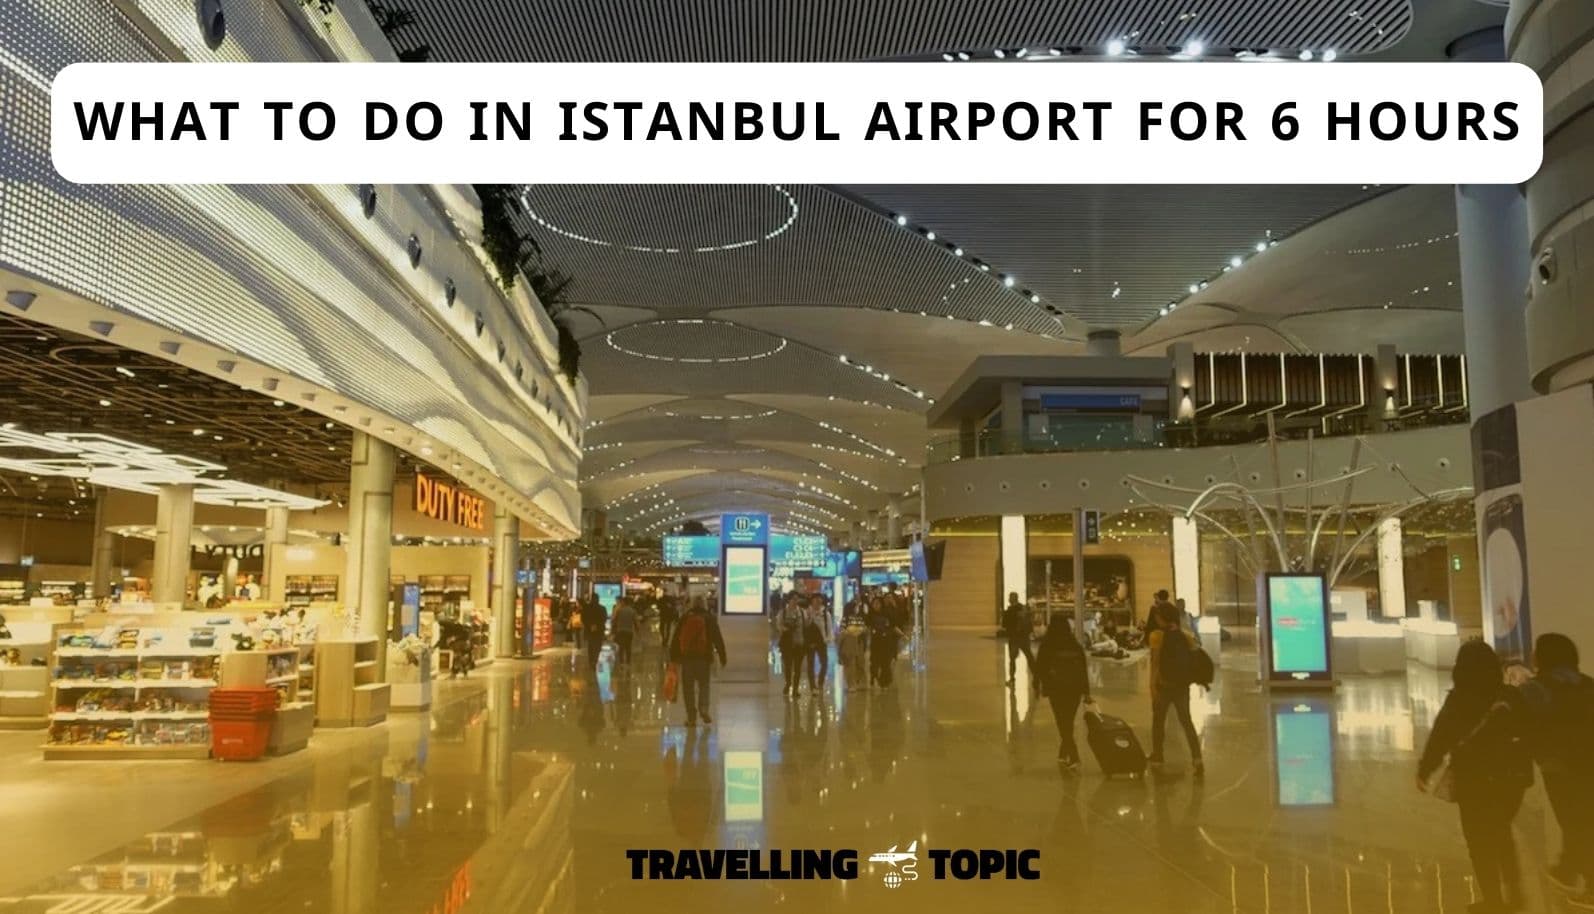 what to do in istanbul airport for 6 hours?